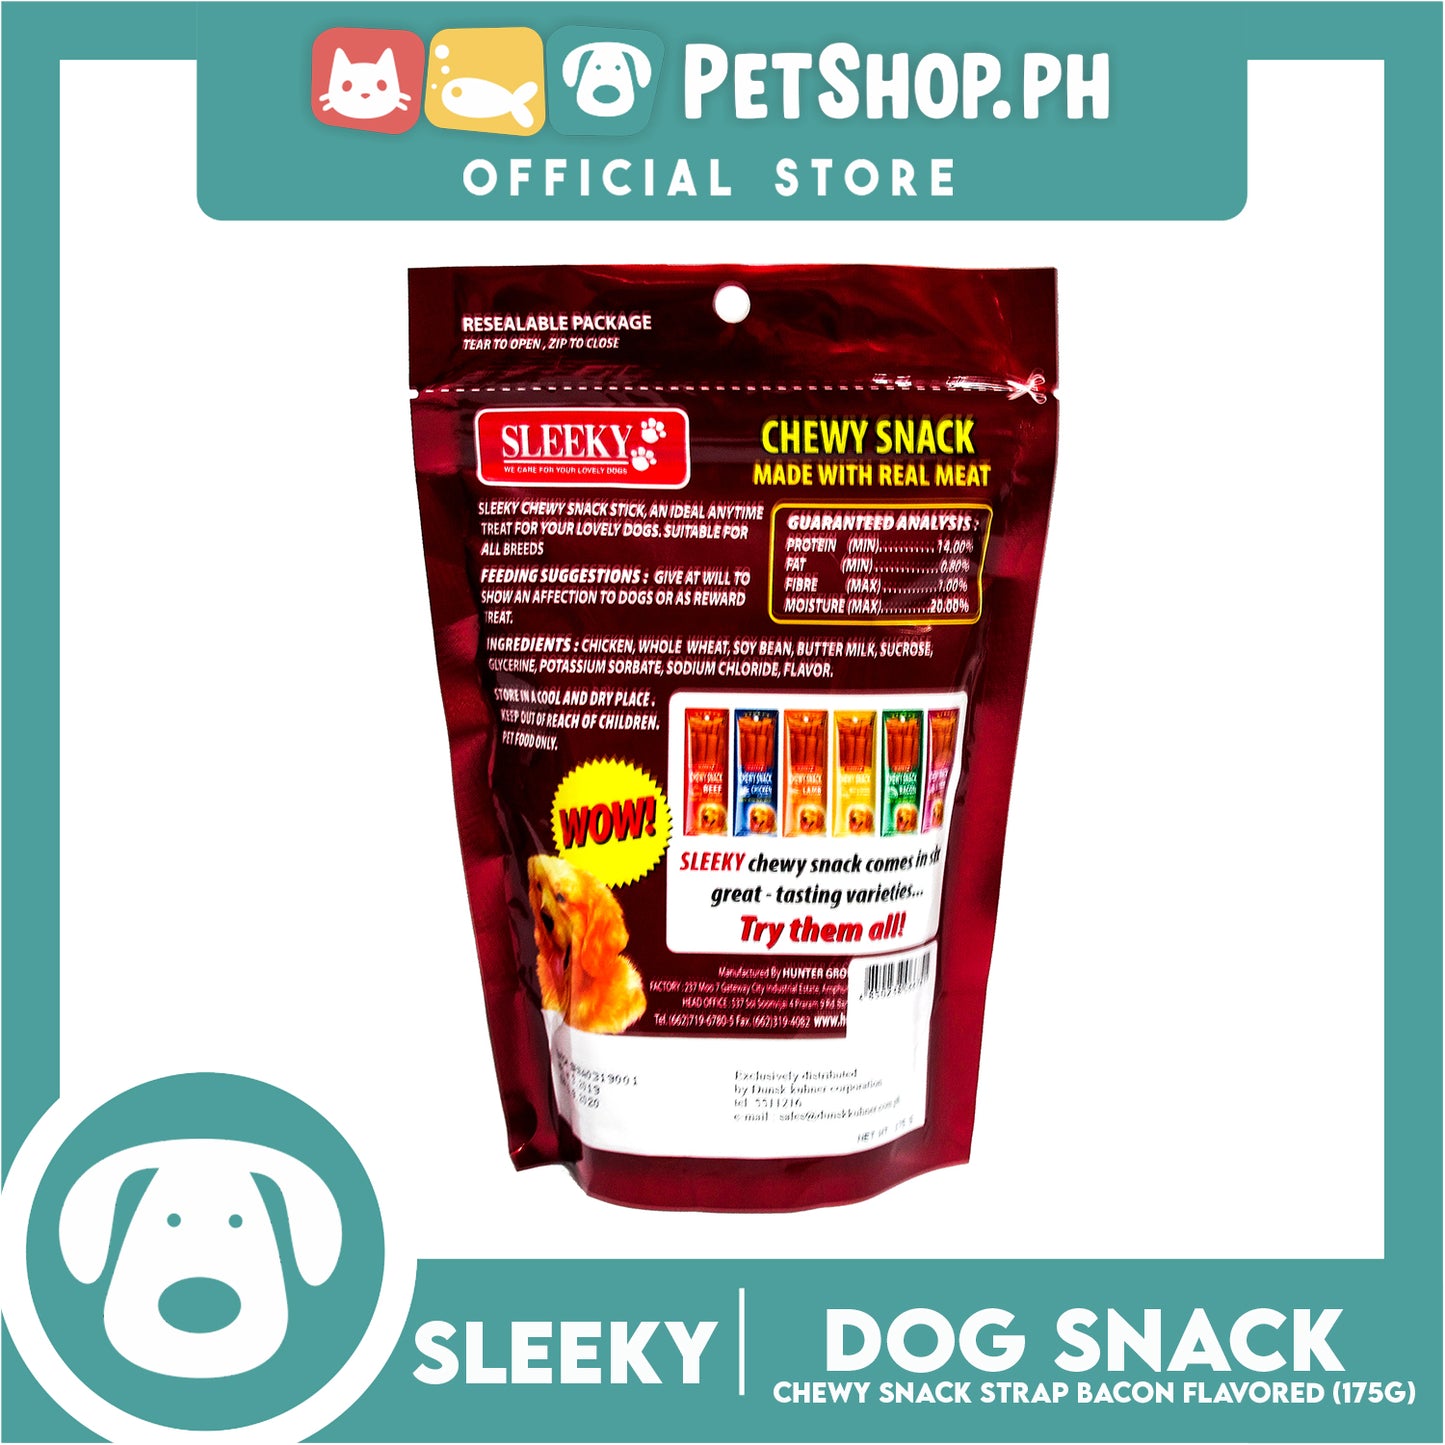 Sleeky Chewy Strap Bacon Flavored 175g Dog Treats